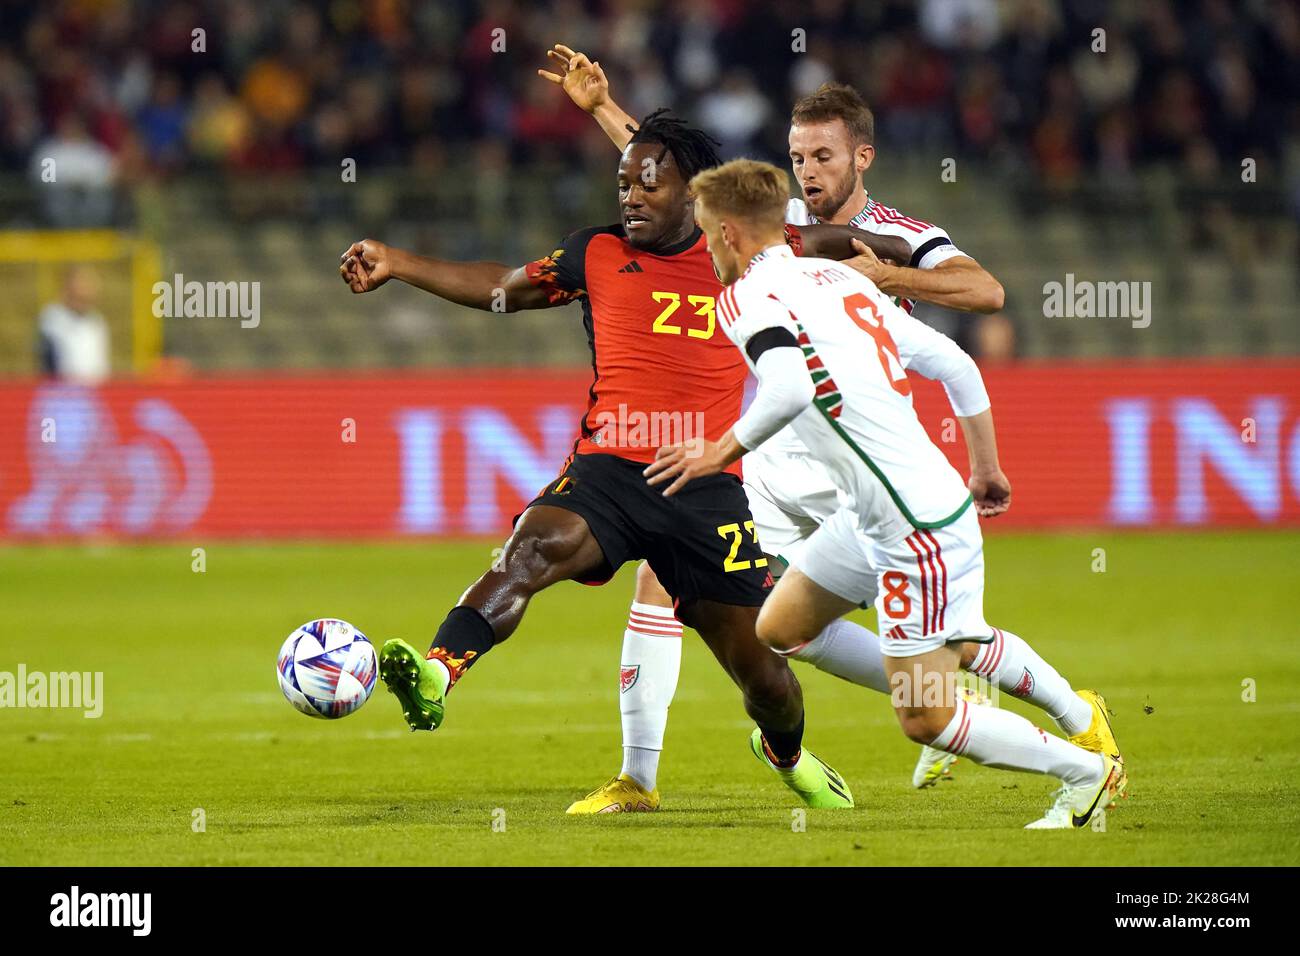 Belgium's Michy Batshuayi (left) battles for the ball with Wales' Matthew Smith and Rhys Norrington-Davies during the UEFA Nations League Group D Match at King Baudouin Stadium, Brussels. Picture date: Thursday September 22, 2022. Stock Photo